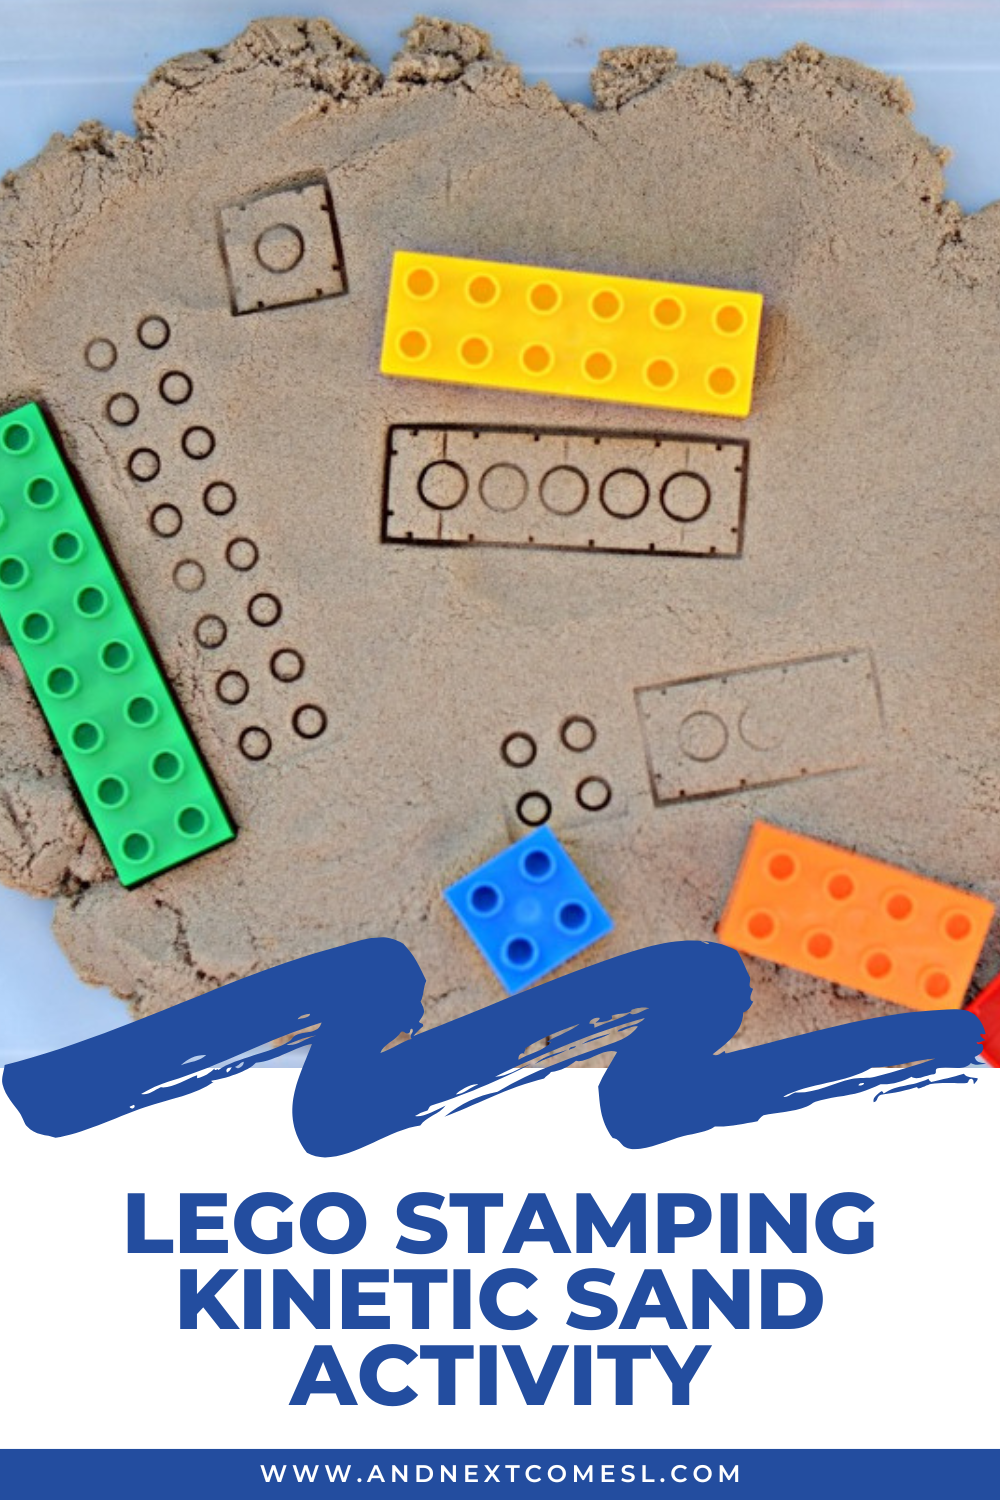 LEGO stamping kinetic sand activity for kids